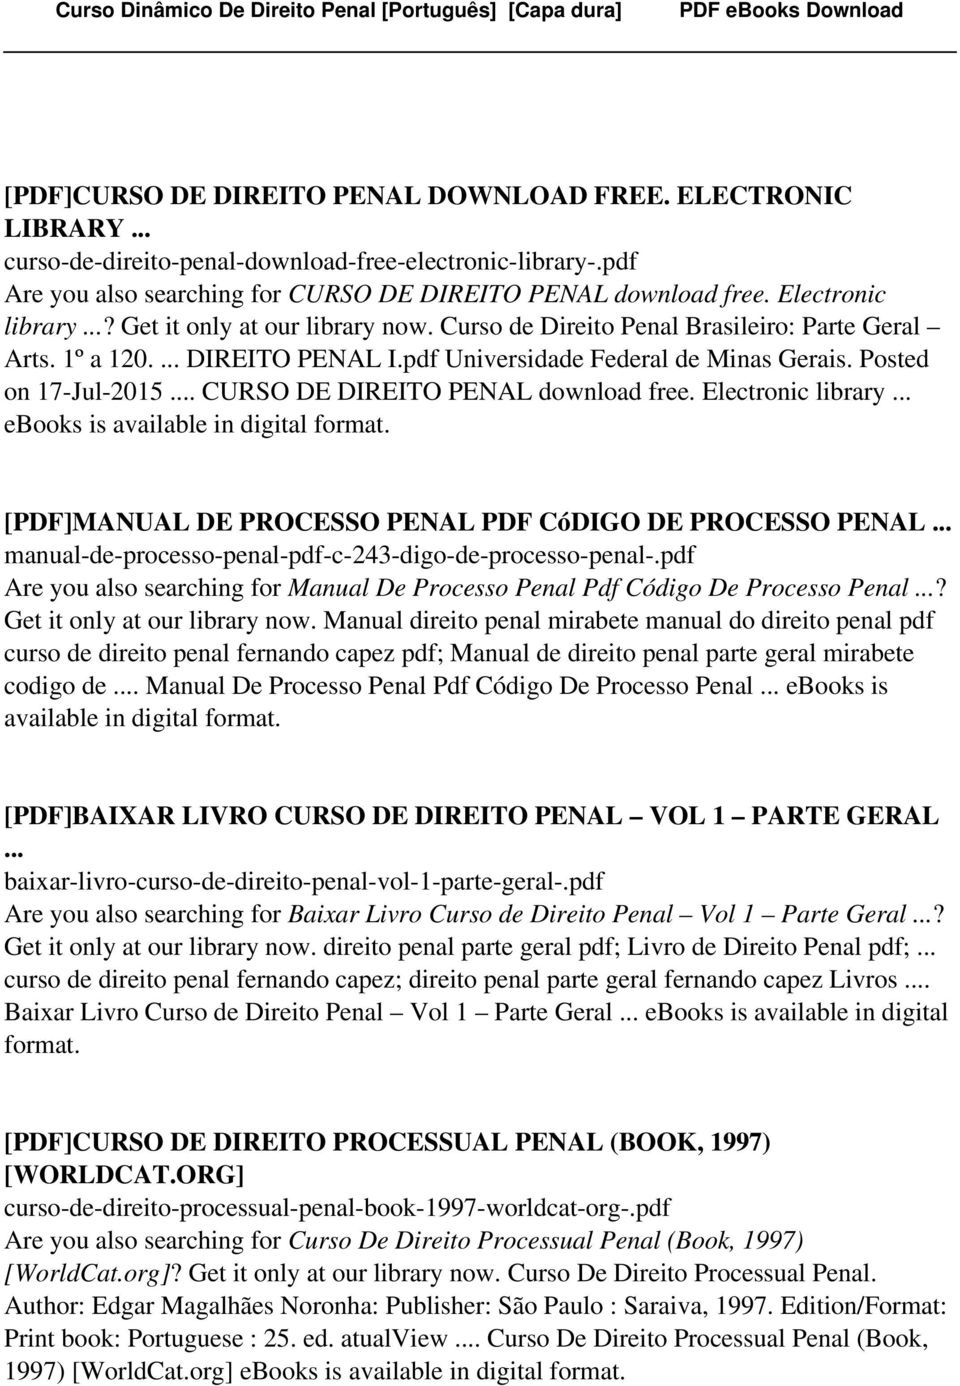 Posted on 17-Jul-2015... CURSO DE DIREITO PENAL download free. Electronic library... ebooks is [PDF]MANUAL DE PROCESSO PENAL PDF CóDIGO DE PROCESSO PENAL.